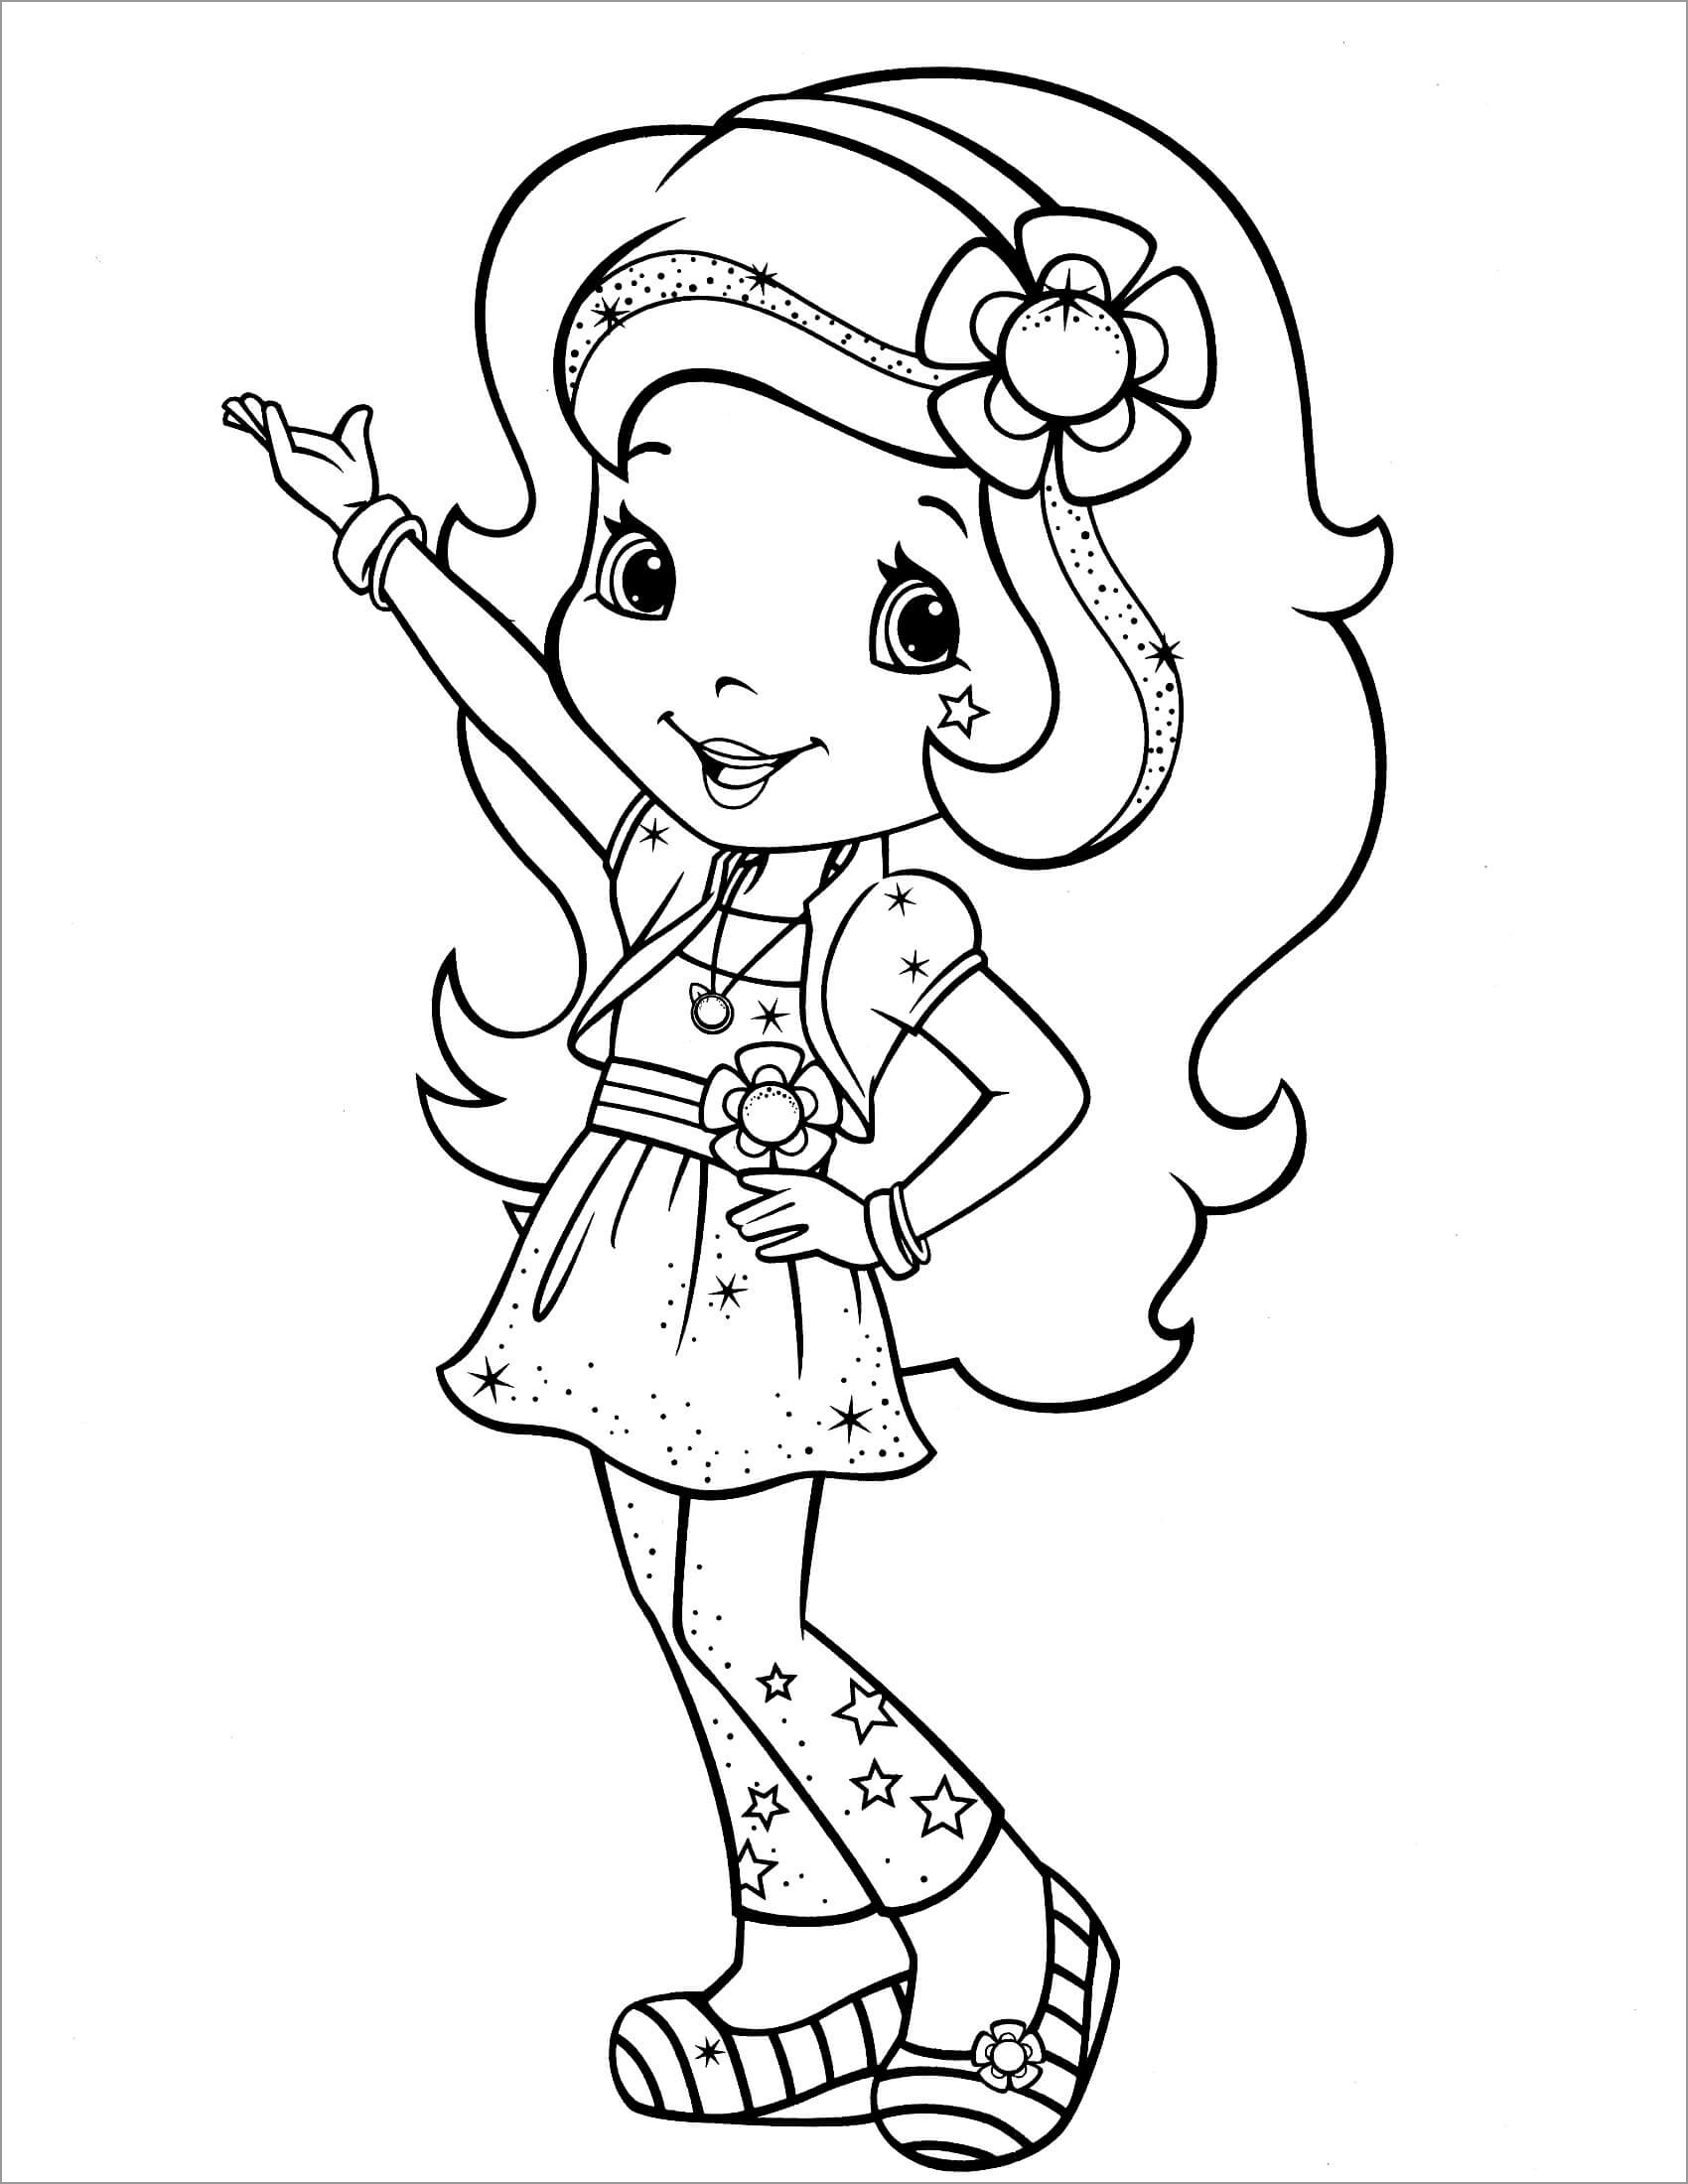 Strawberry Shortcake Stars Coloring Page